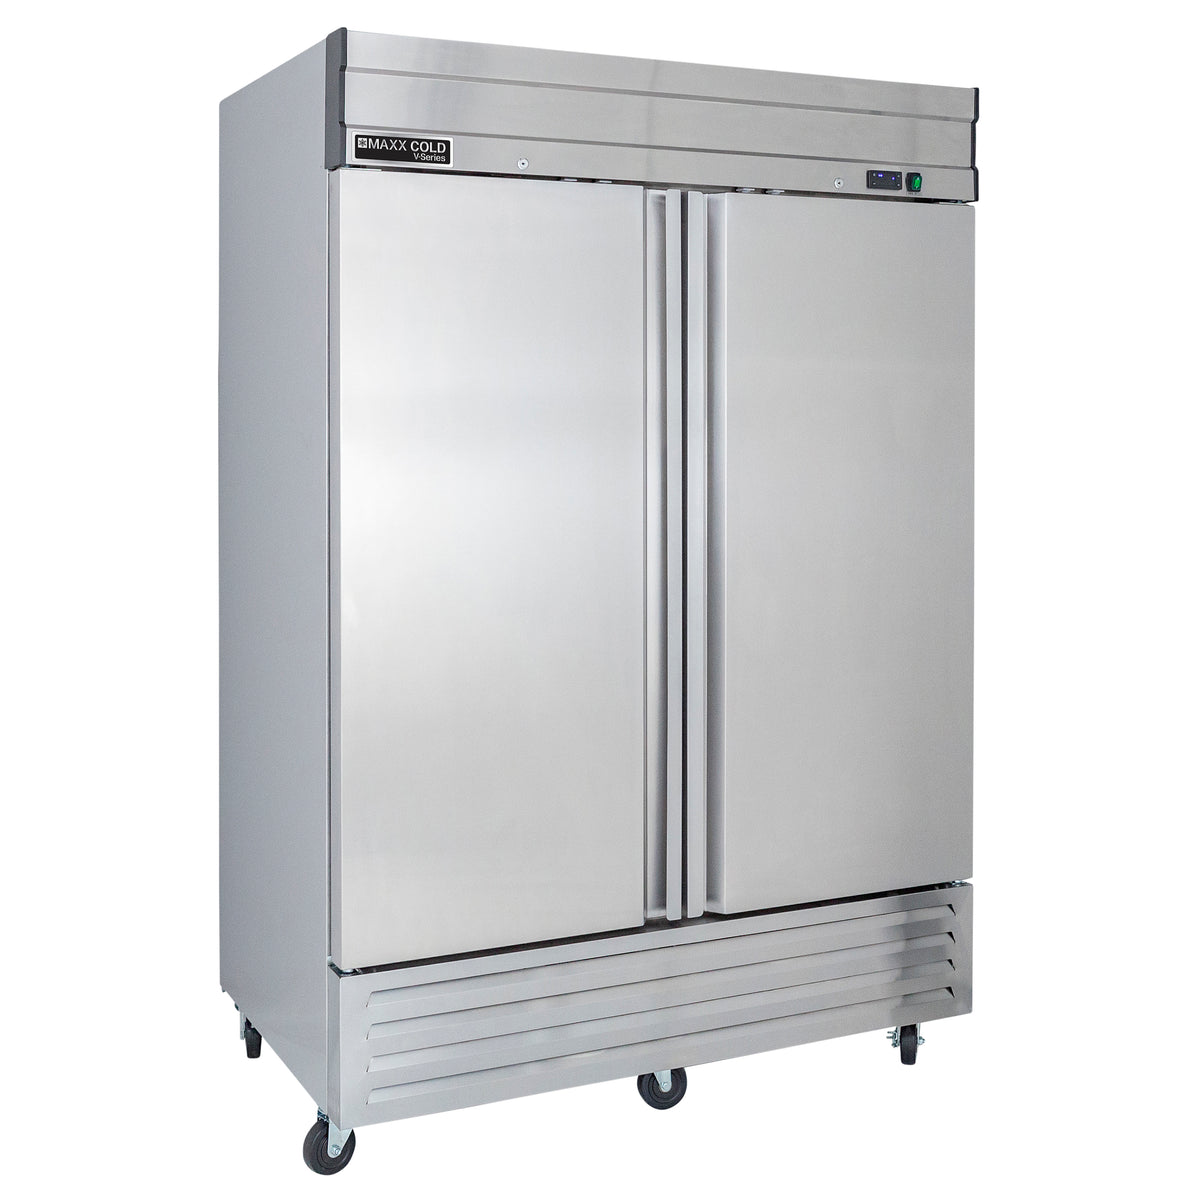 Maxx Cold MVR-49FD V-Series 2 Solid Door Reach-In Refrigerator, Bottom Mount, 54"W, 42 cu. ft. Storage Capacity, in Stainless Steel (MVR-49FDHC)